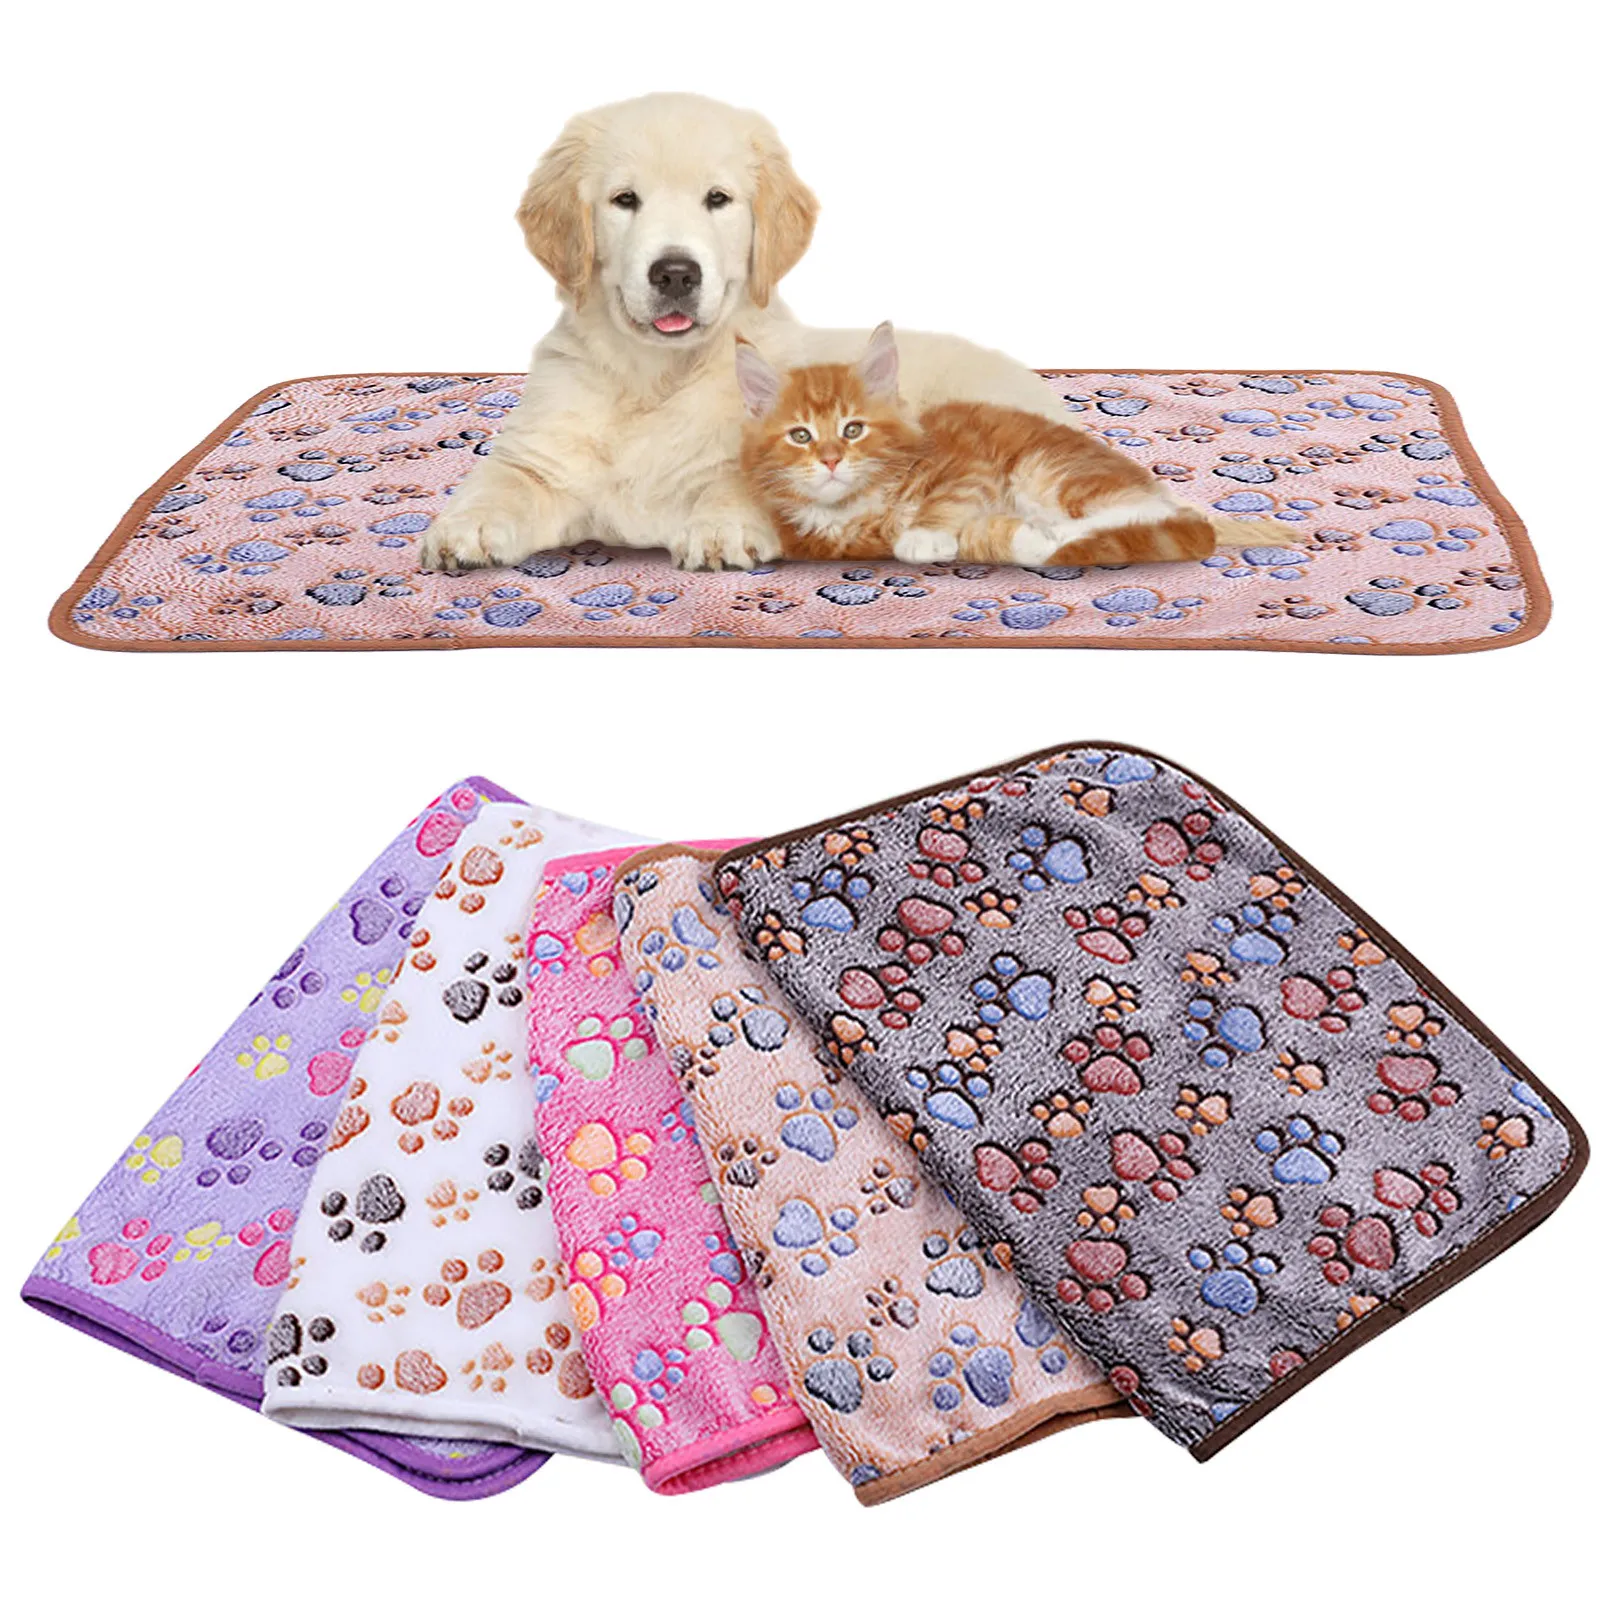 Pet Blanket Warm Dog Cat pet Rats Fleece Blankets Sleep Mat Pad Bed Cover with Paw Print Soft Blanket for Kitten Puppy and Other Small Animals 6 Colors, 24X 28 Inch 